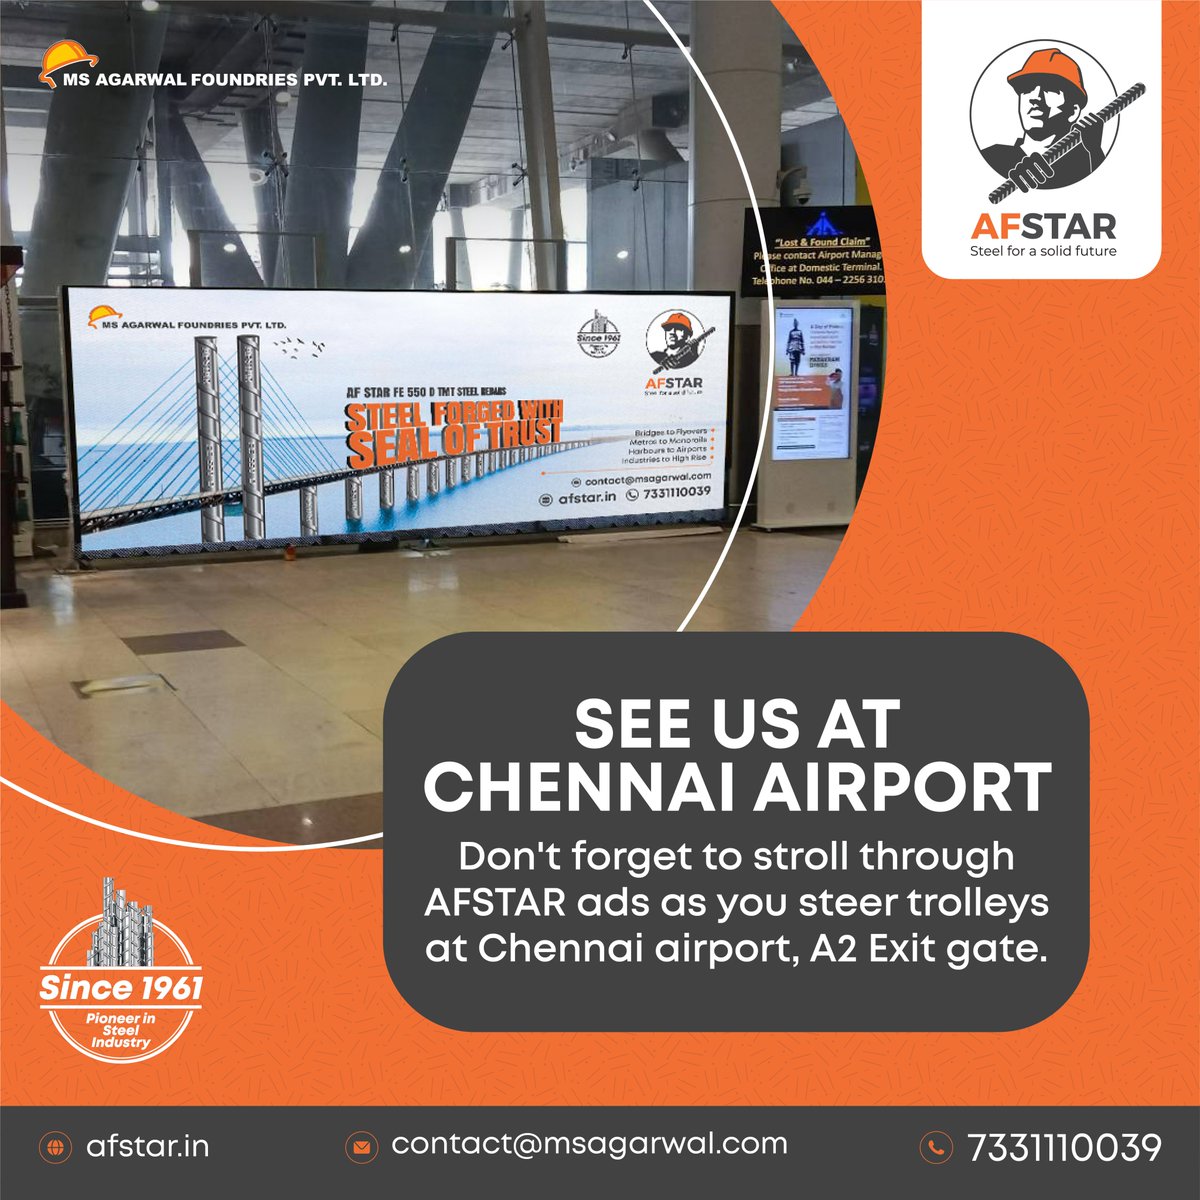 Excited to showcase our hoarding at Chennai airport, witness the steel shining through the creative as you walk past the A2 exit gate.
#enduringstrength #steelontrack #AFSTAR #StrengthAndResilience  #manufacturing #technology #superiorquality 
#strong #TMT #TMTBars #foundation